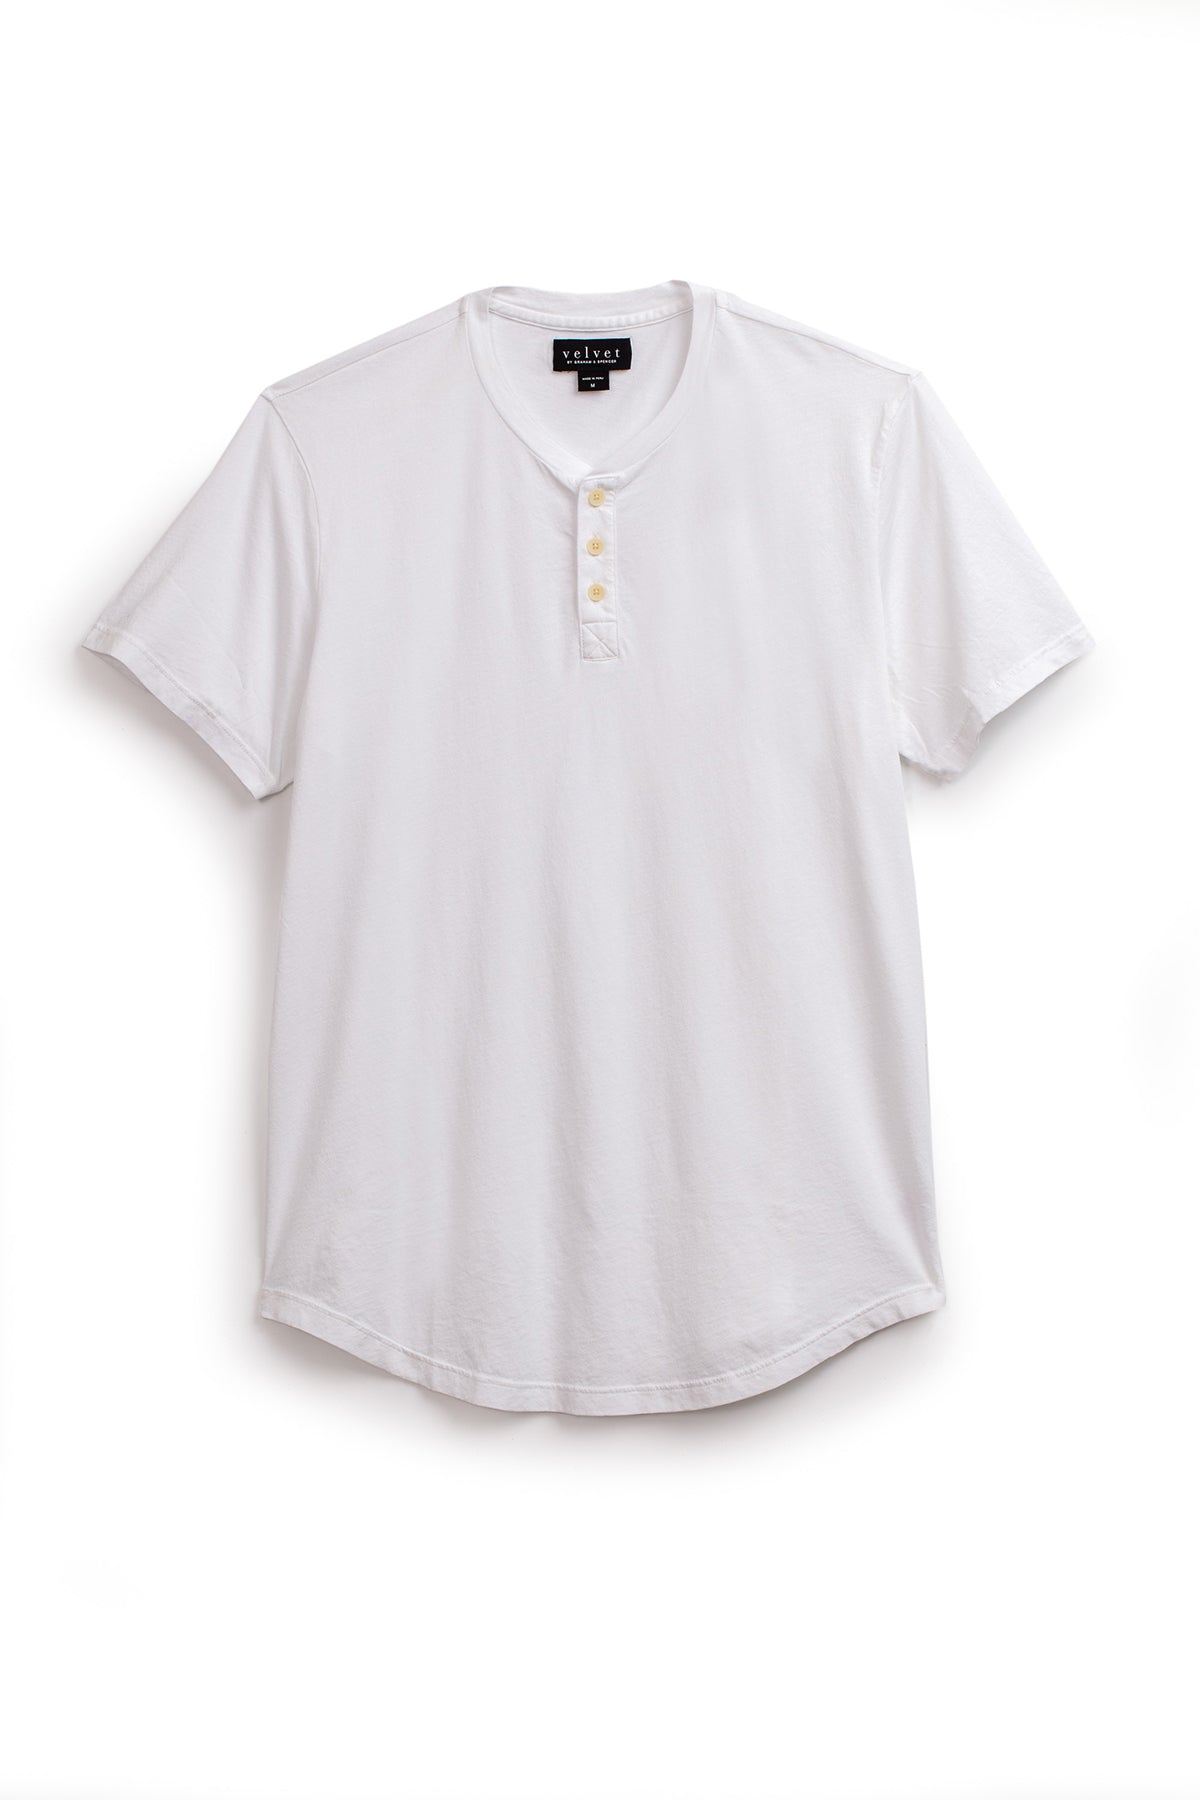   White FULTON HENLEY tee with short sleeves and a three-button placket, crafted from lightweight cotton jersey, displayed flat on a white background. 